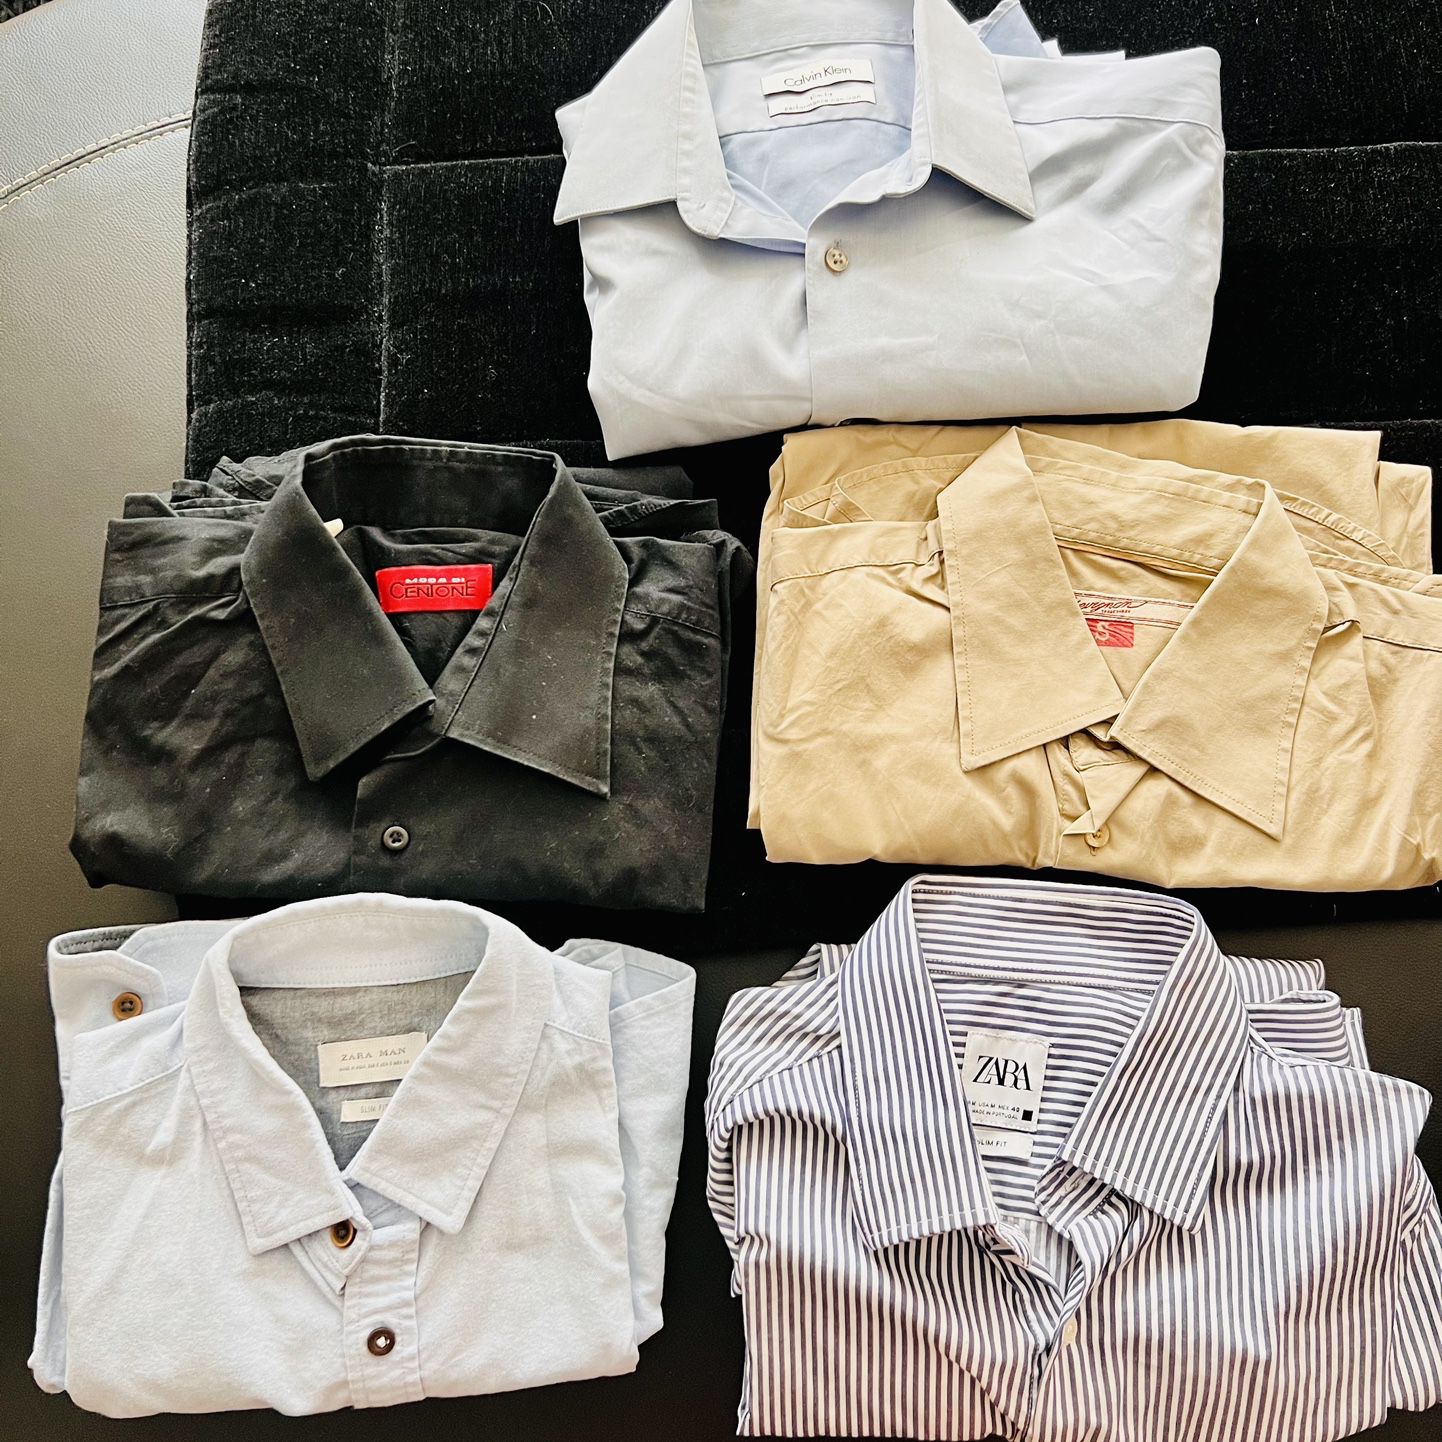 5 Men Shirts Very Good Condition Worn Few Times Slim Fit Size S OR M